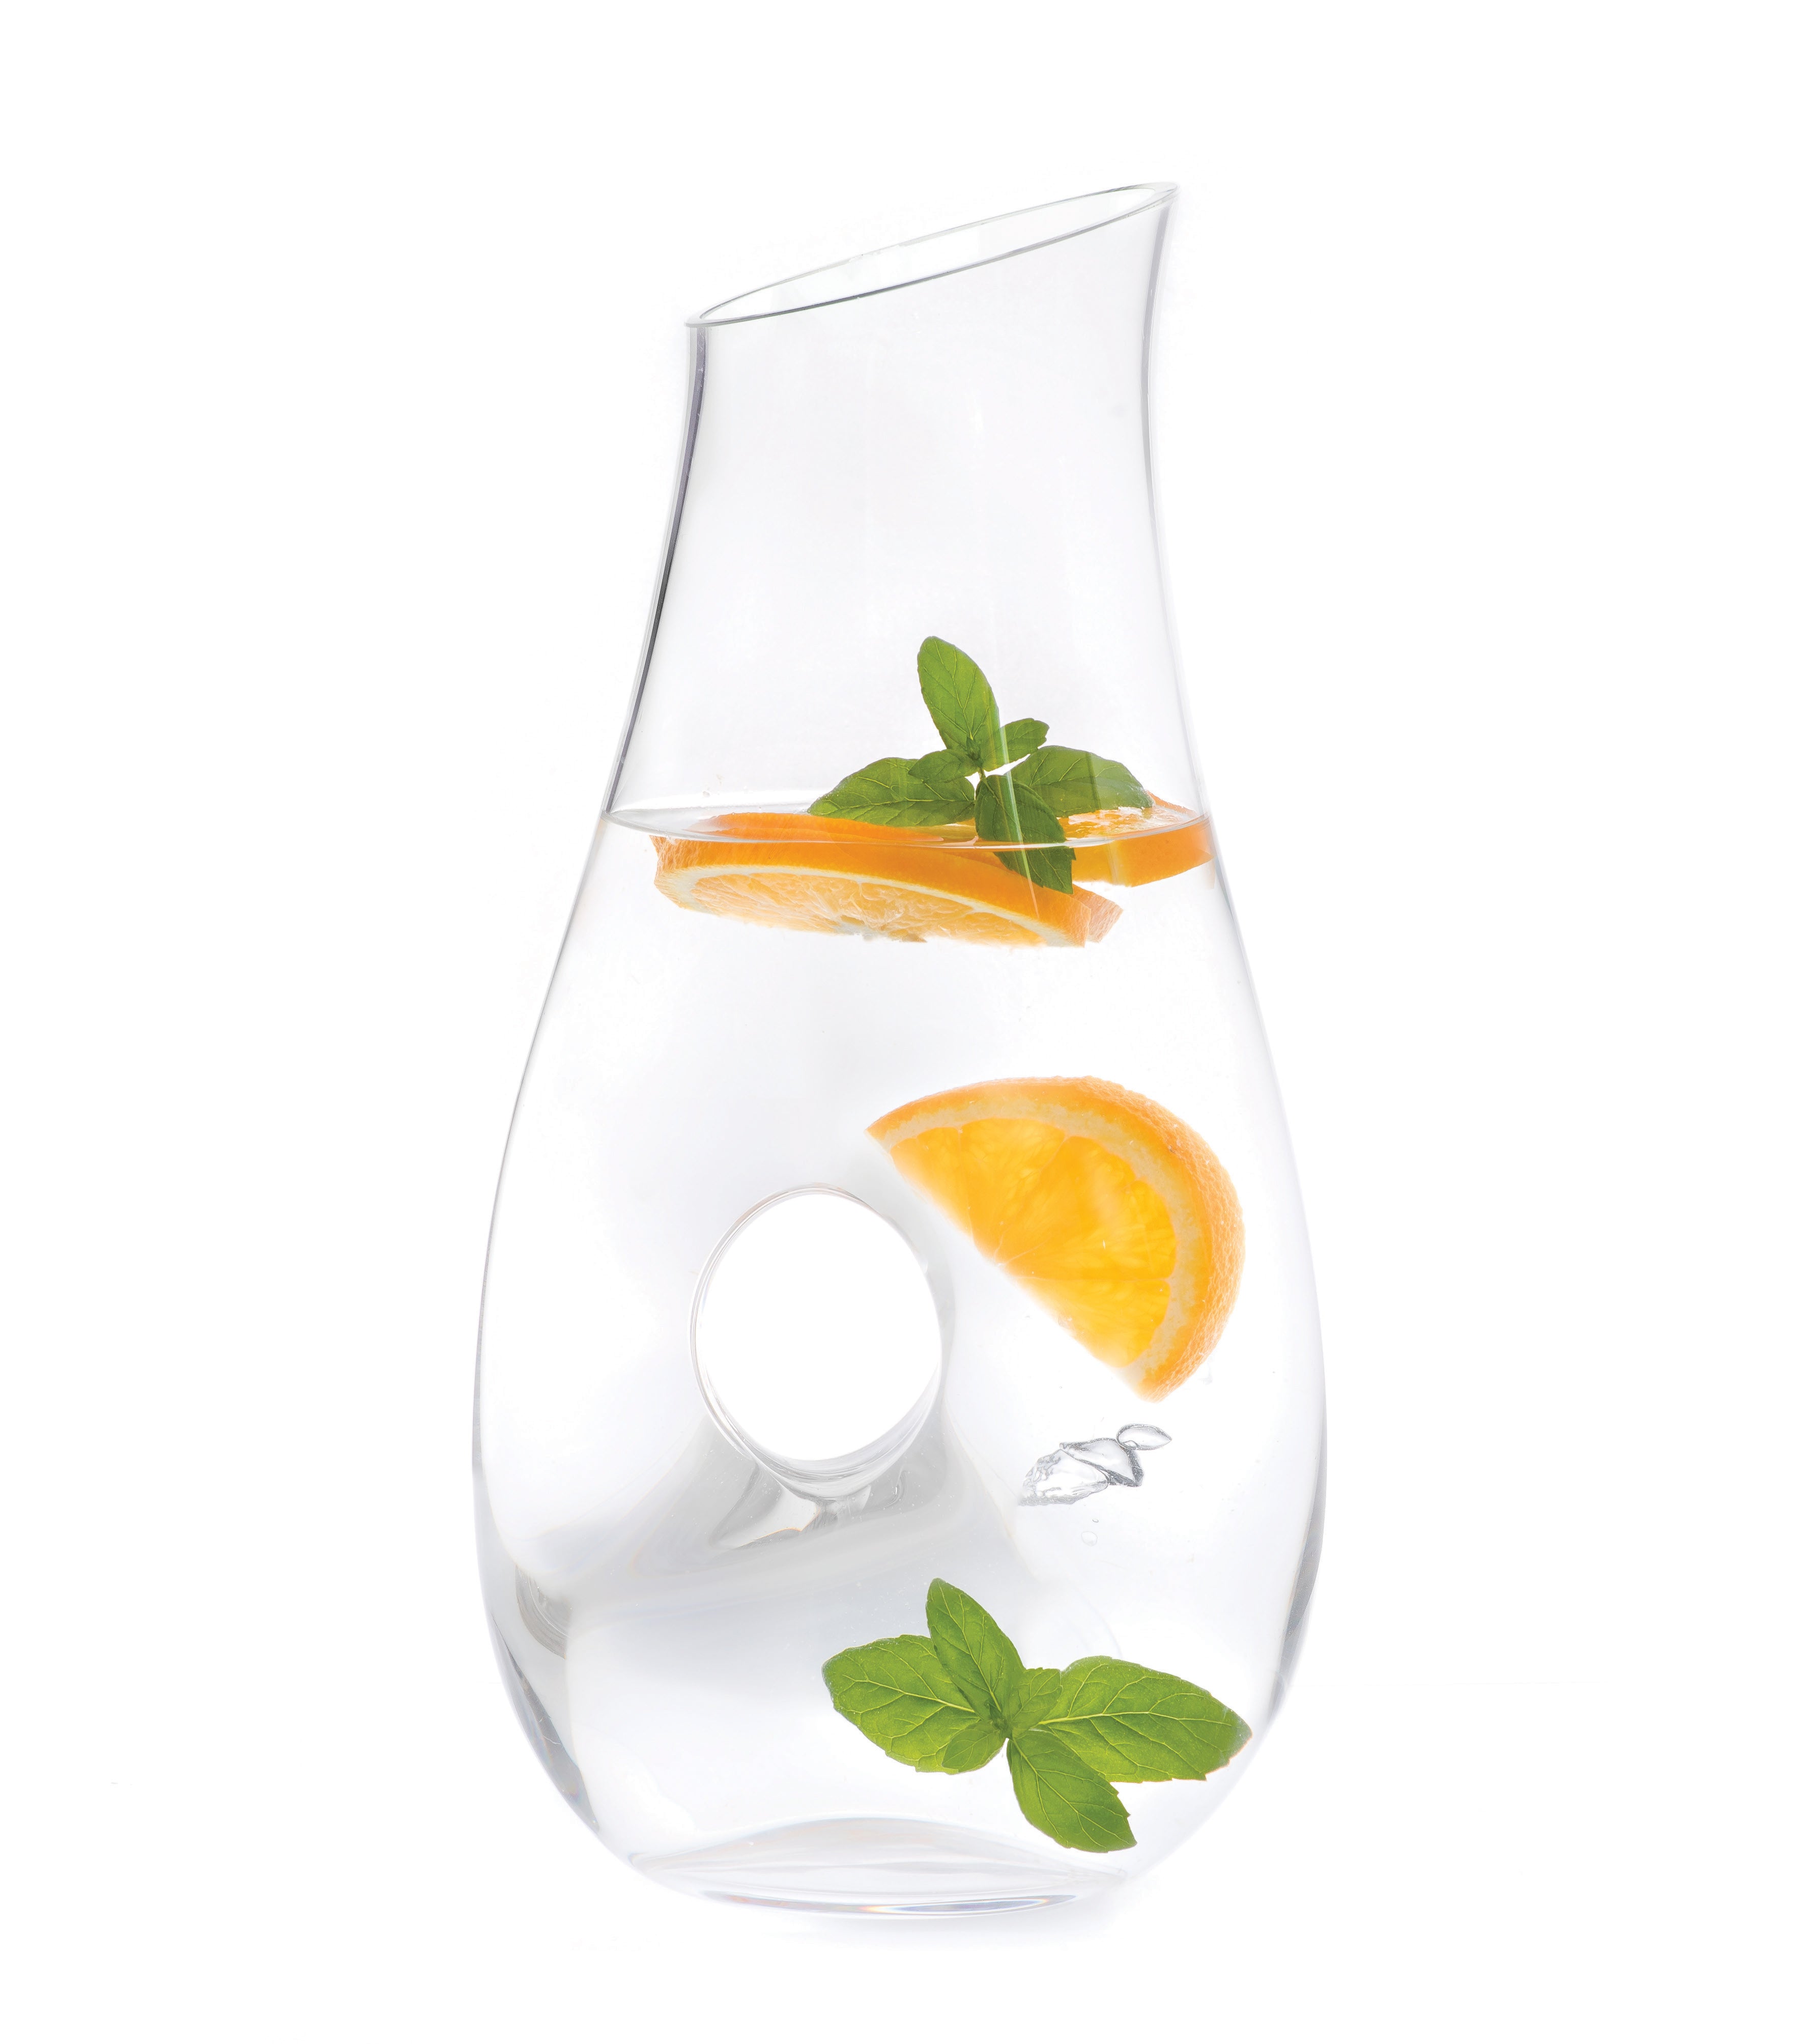 Glass Decanter Pitcher with 1.5L Carafe for Serving Drinks